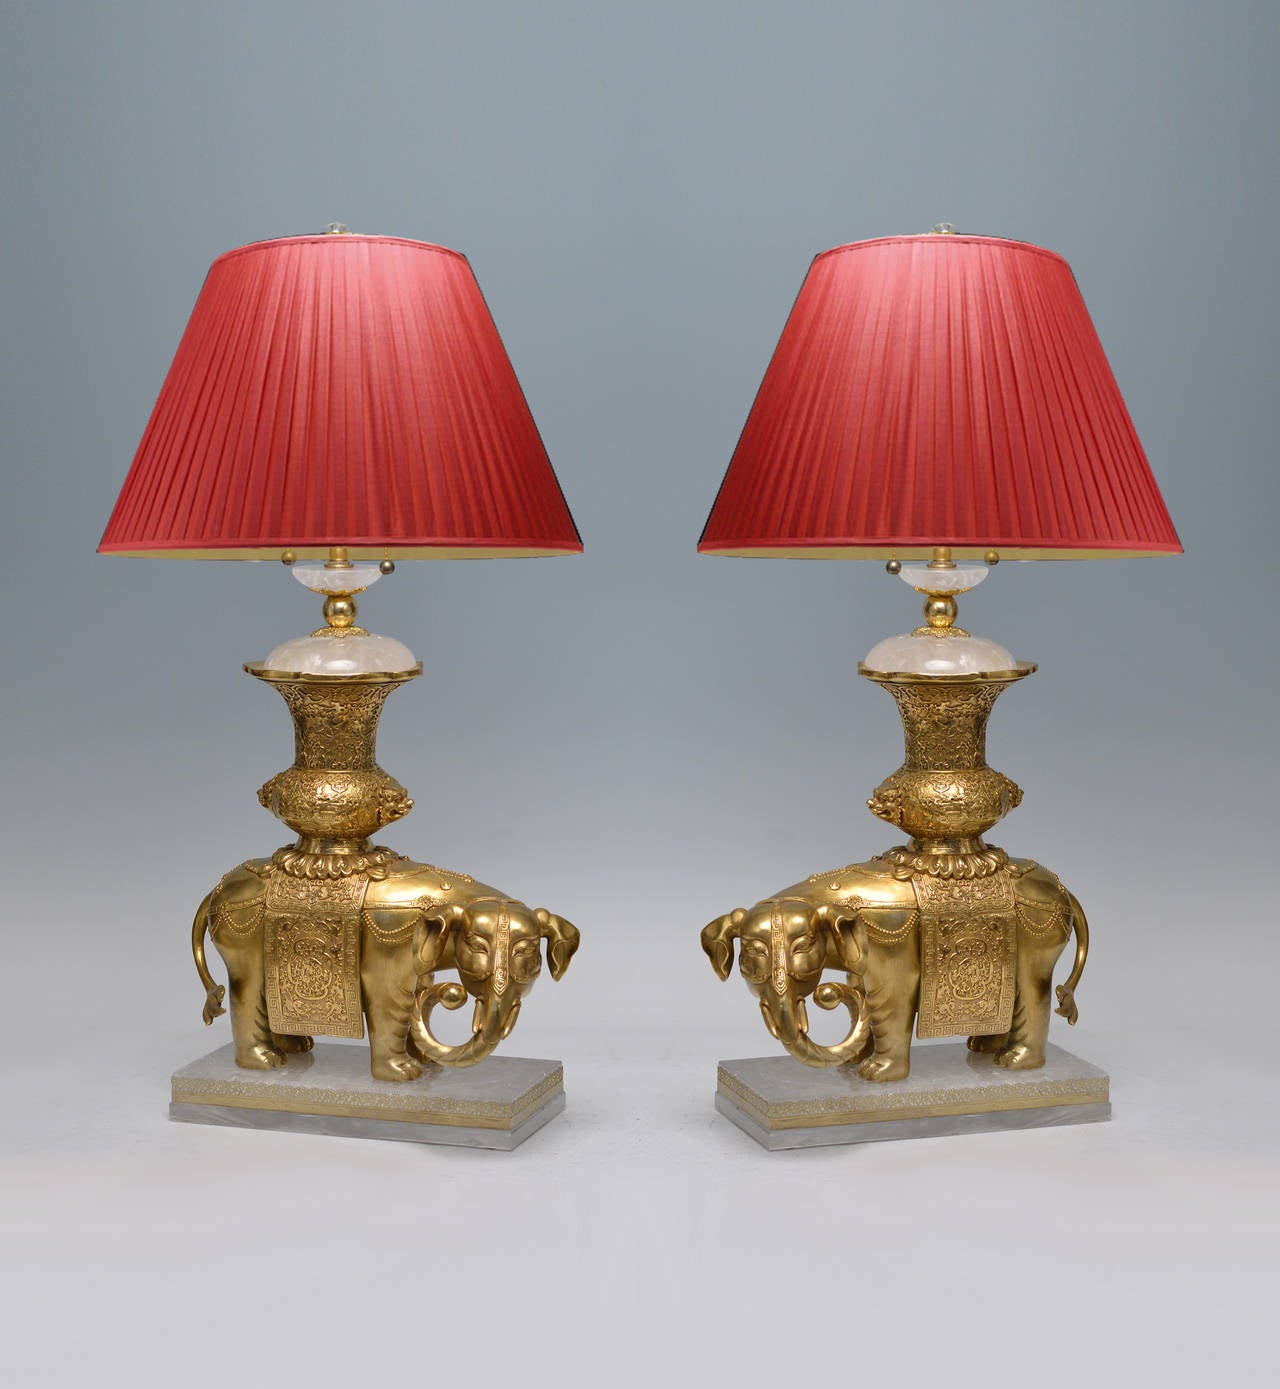 Fine cast gilt bronze figures of the elephant's lamps with rock crystals.